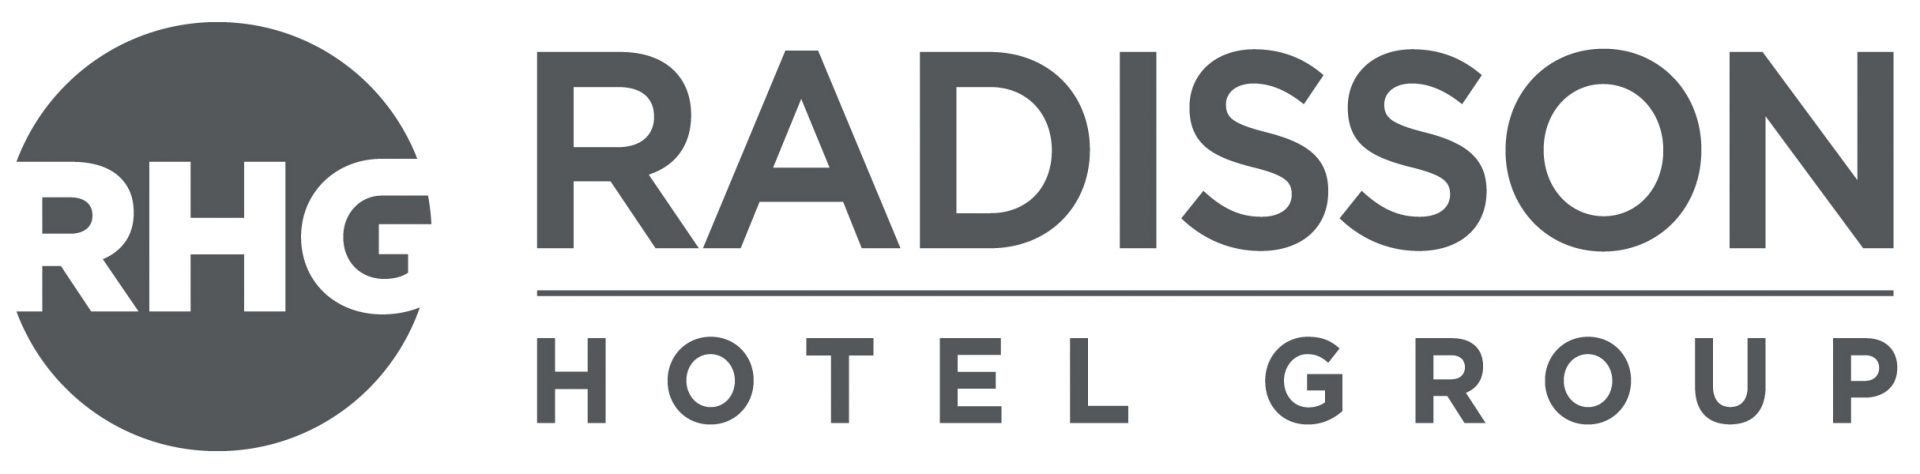 Radisson Hotel Group’s steady ambition to expand in the Middle East Logo